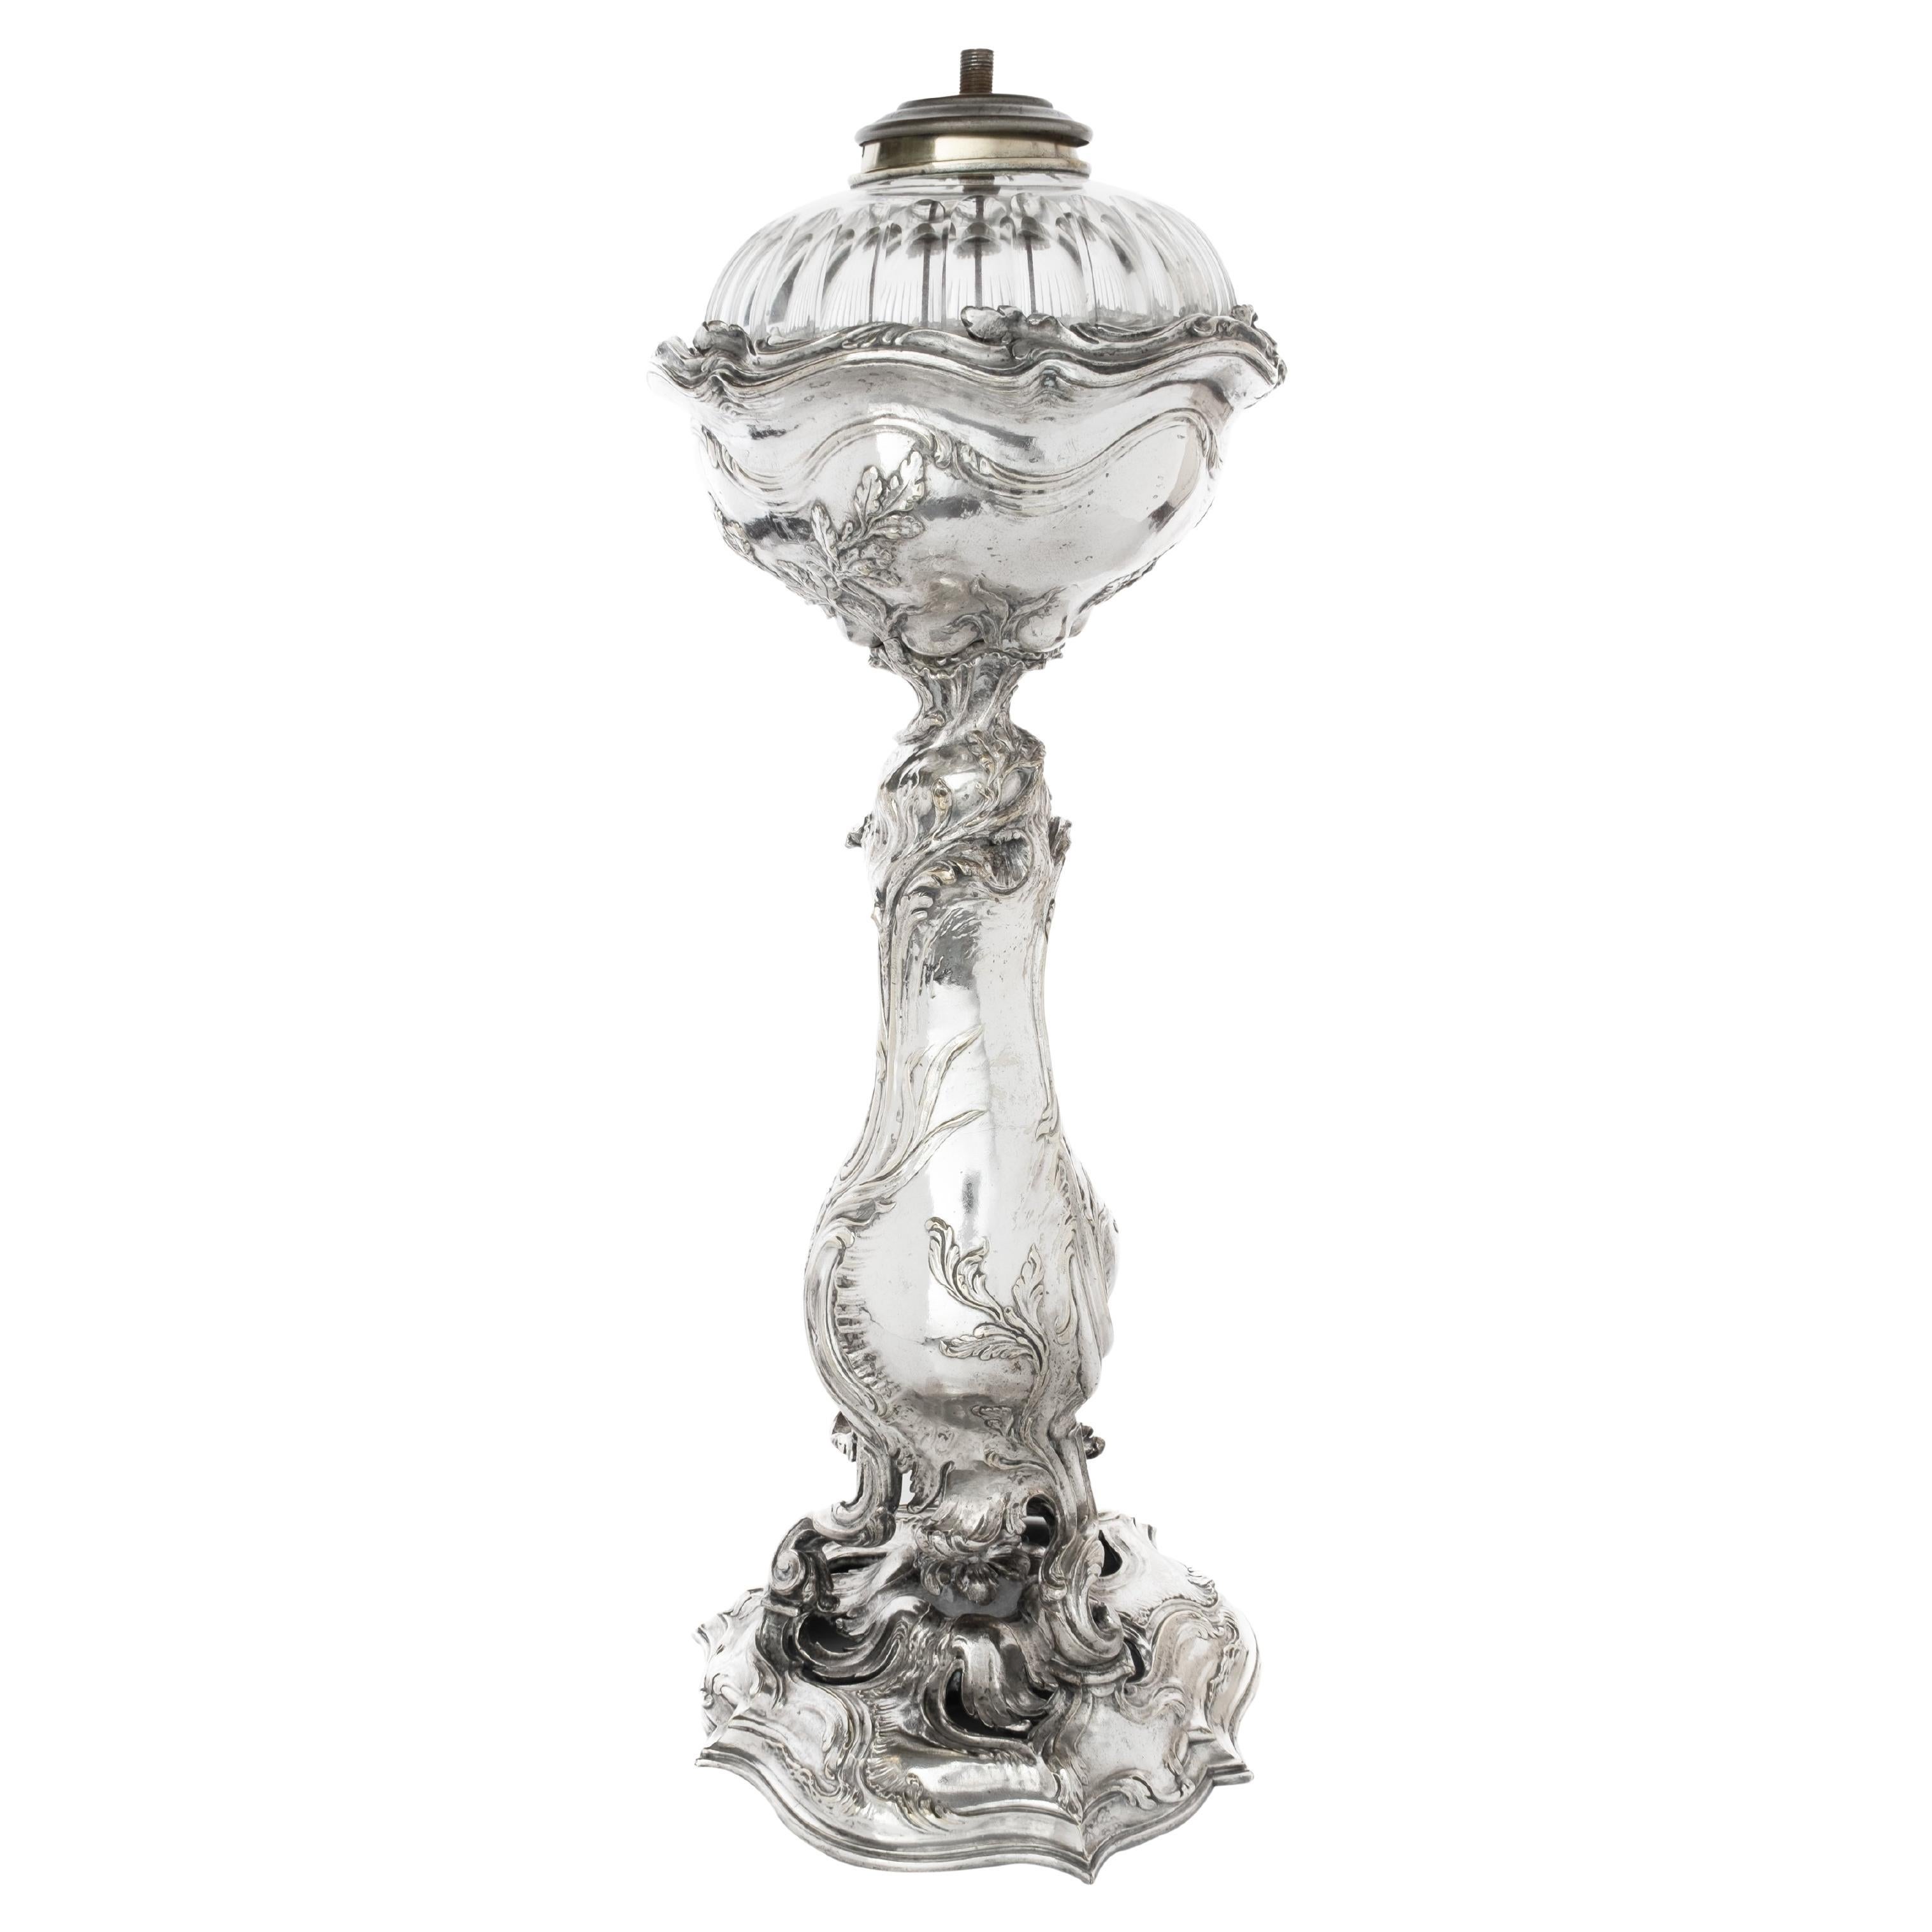 Exceptional Silvered Bronze and Cut Crystal Banquet Lamp, 19th century For Sale